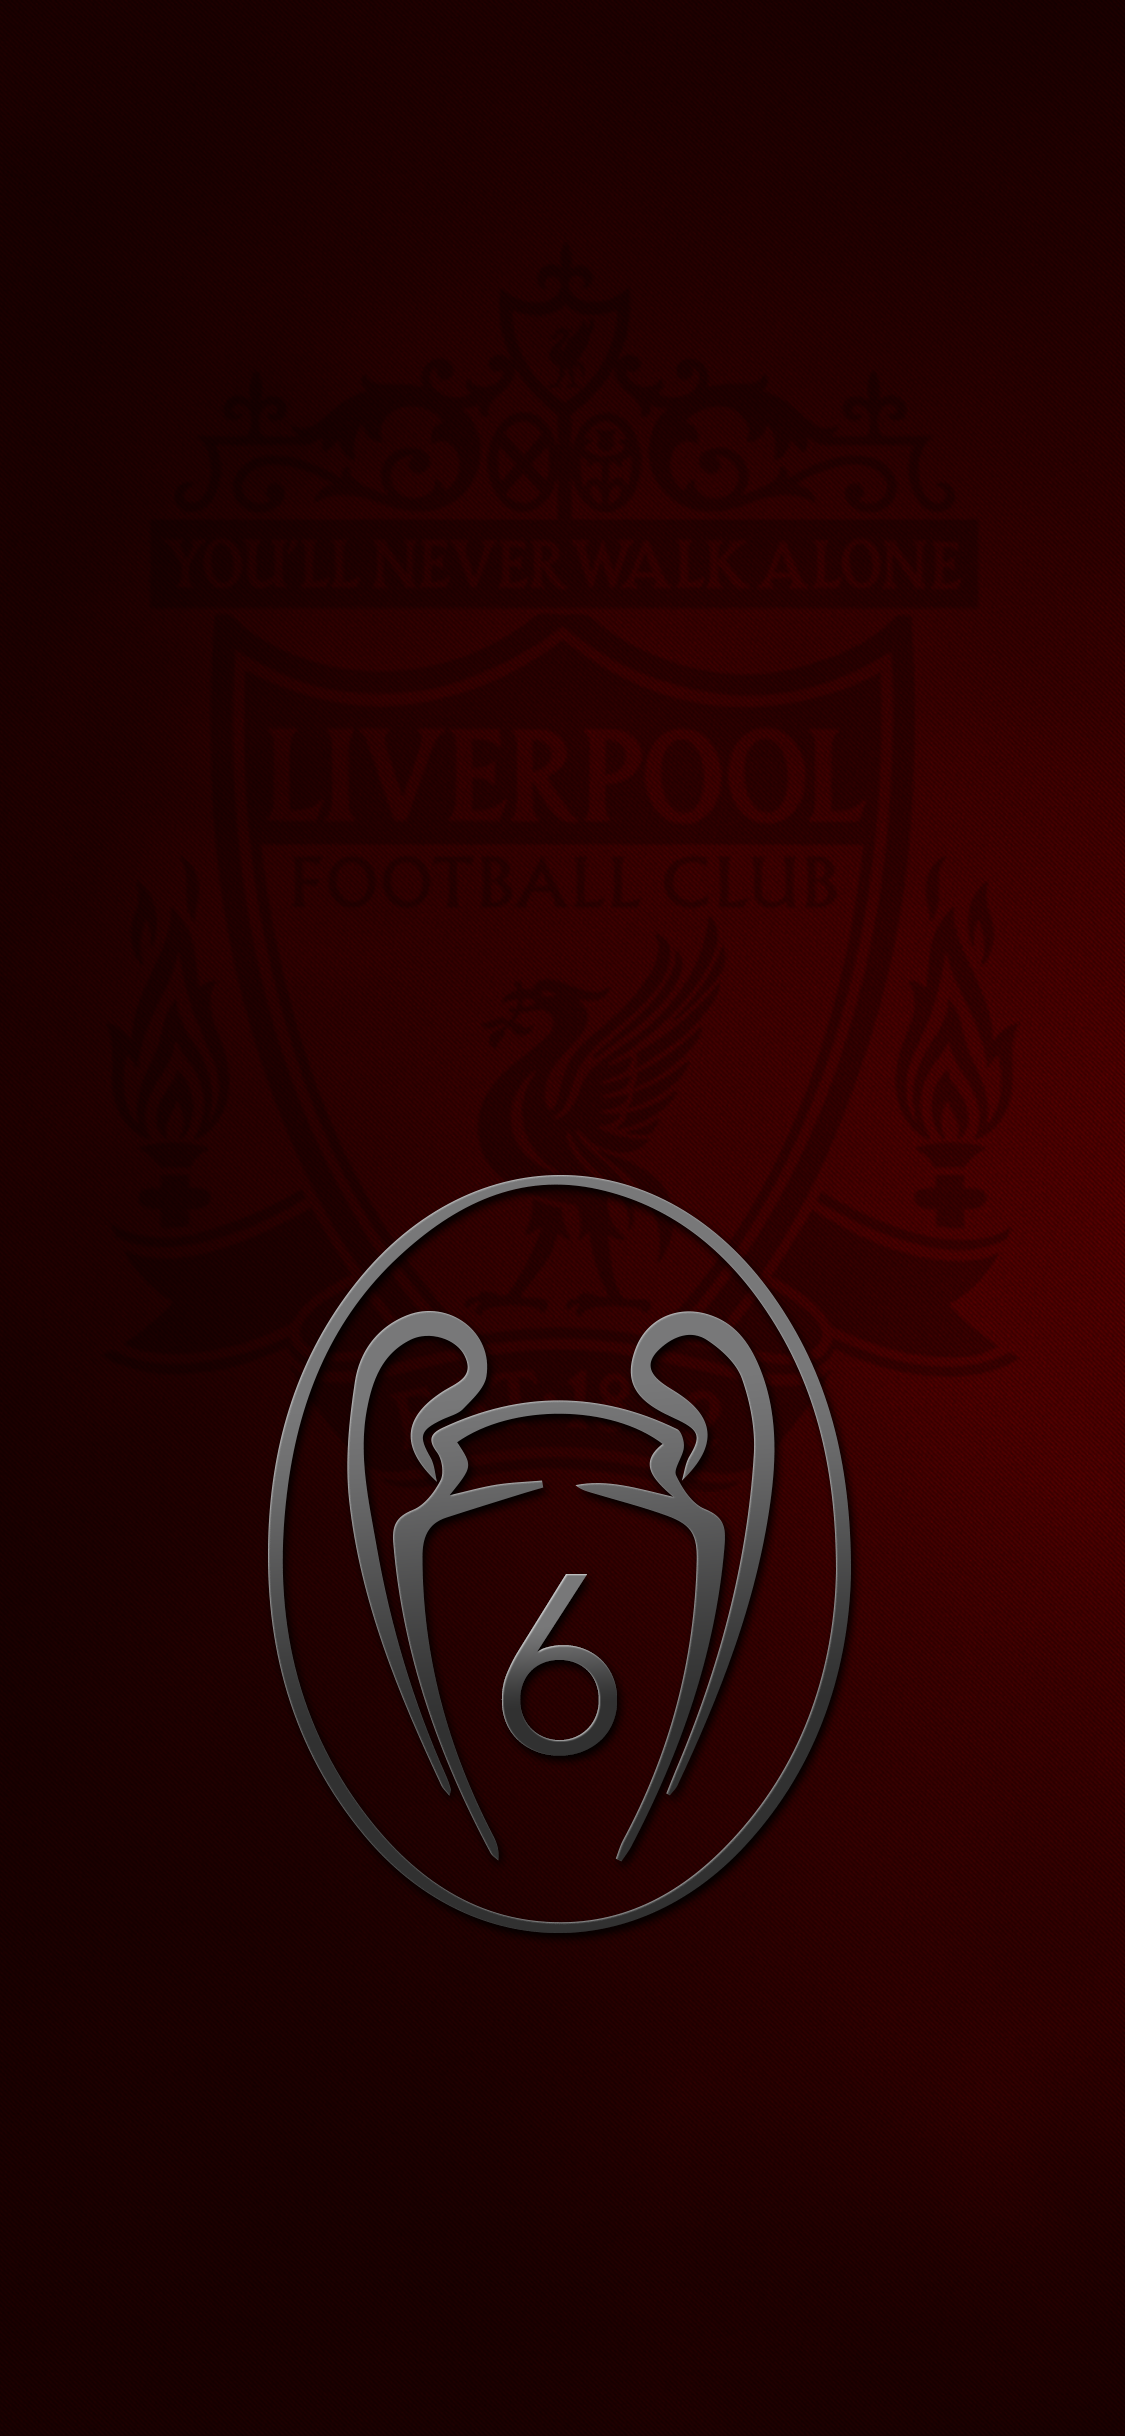 Liverpool 4k Wallpapers Wallpaper Cave Perfect screen background display for desktop, iphone, pc, laptop, computer, android phone, smartphone, imac, macbook, tablet, mobile device. liverpool 4k wallpapers wallpaper cave